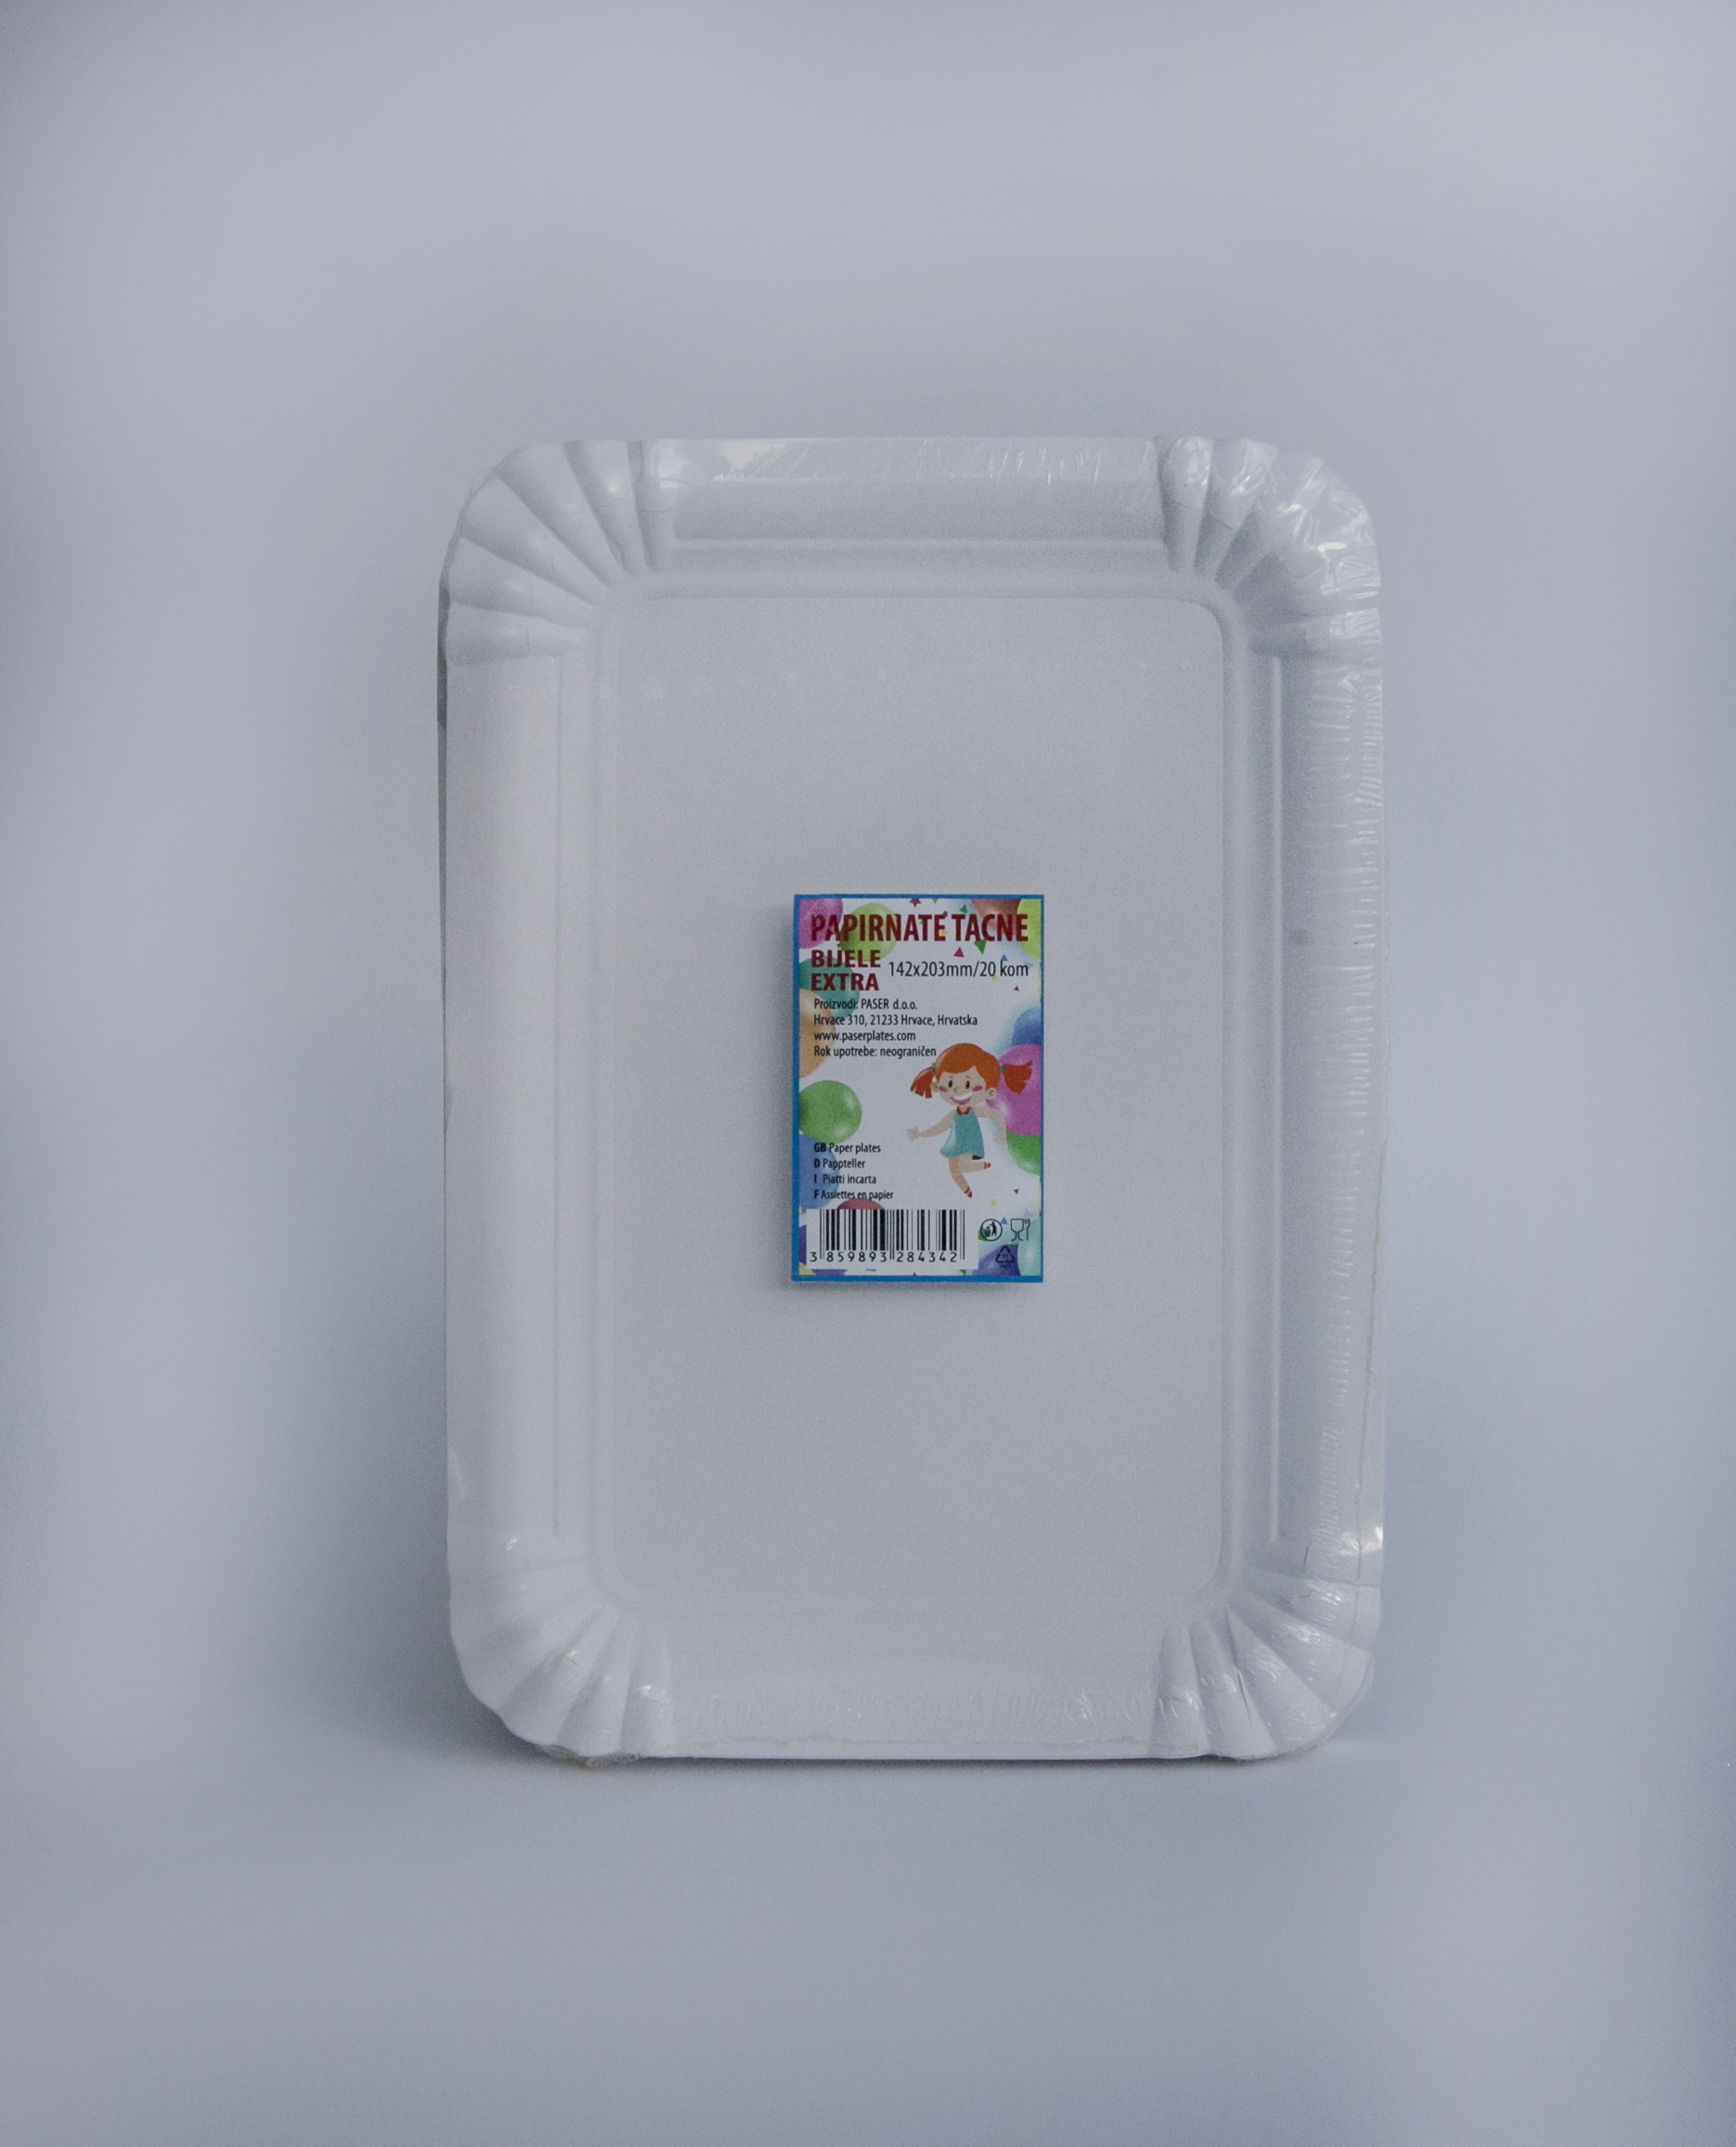 White paper plates and trays